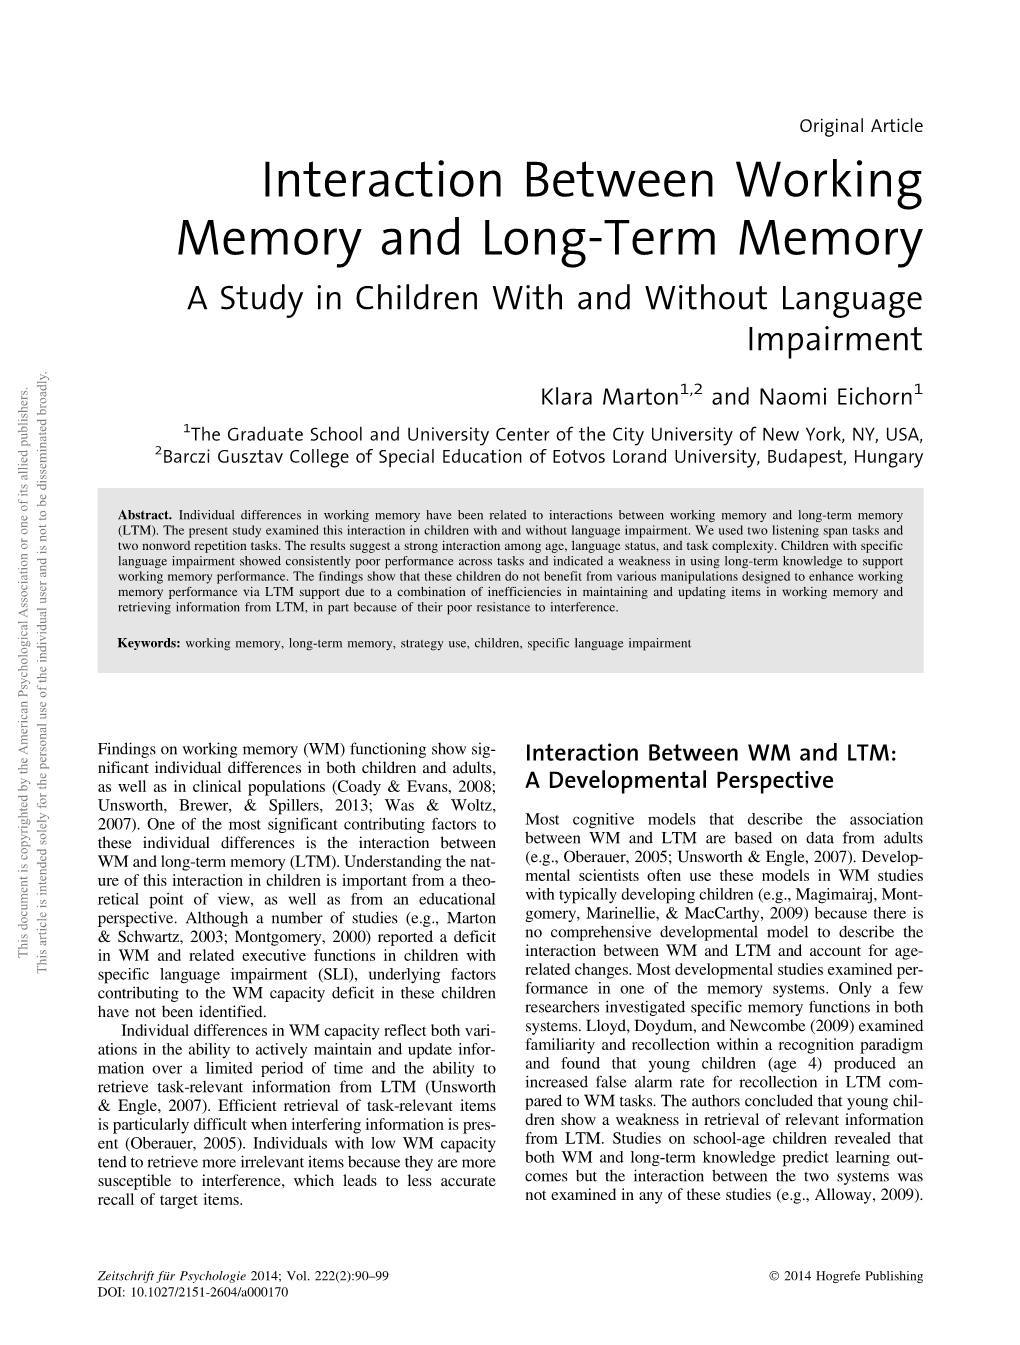 Interaction Between Working Memory and Long-Term Memory a Study in Children with and Without Language Impairment